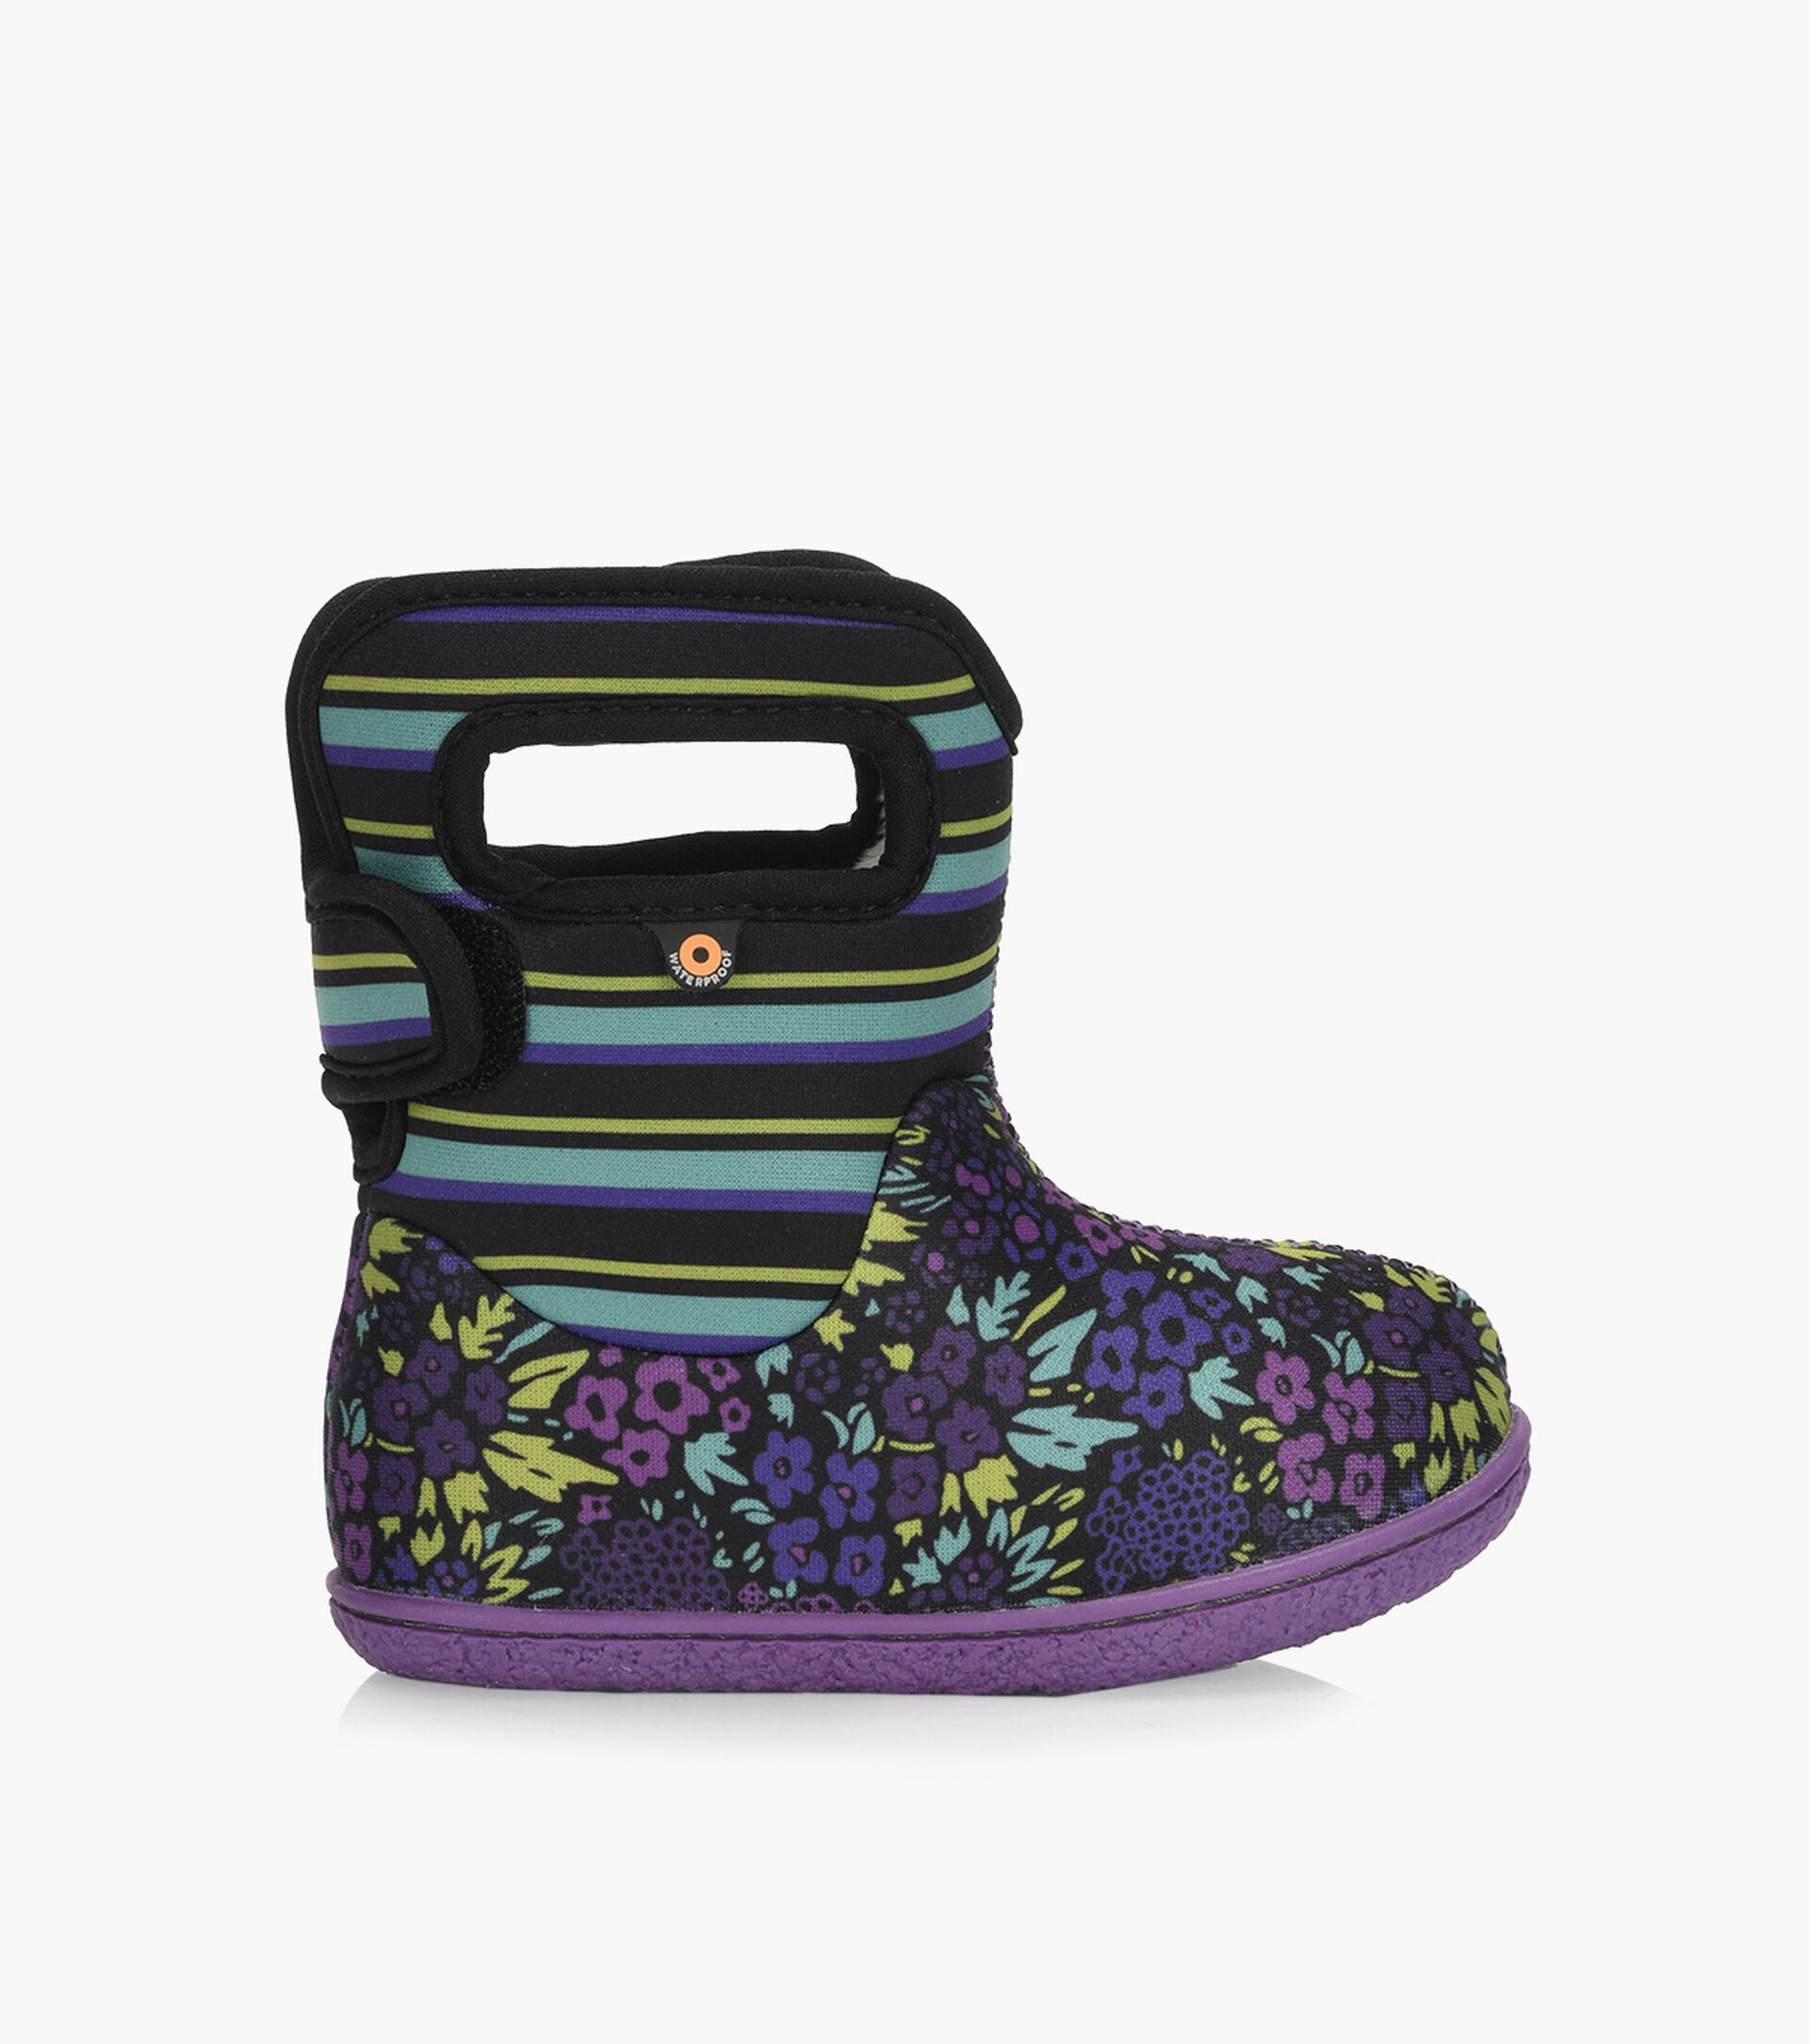 BOGS BABY BOGS NW GARDENS - Black | Browns Shoes